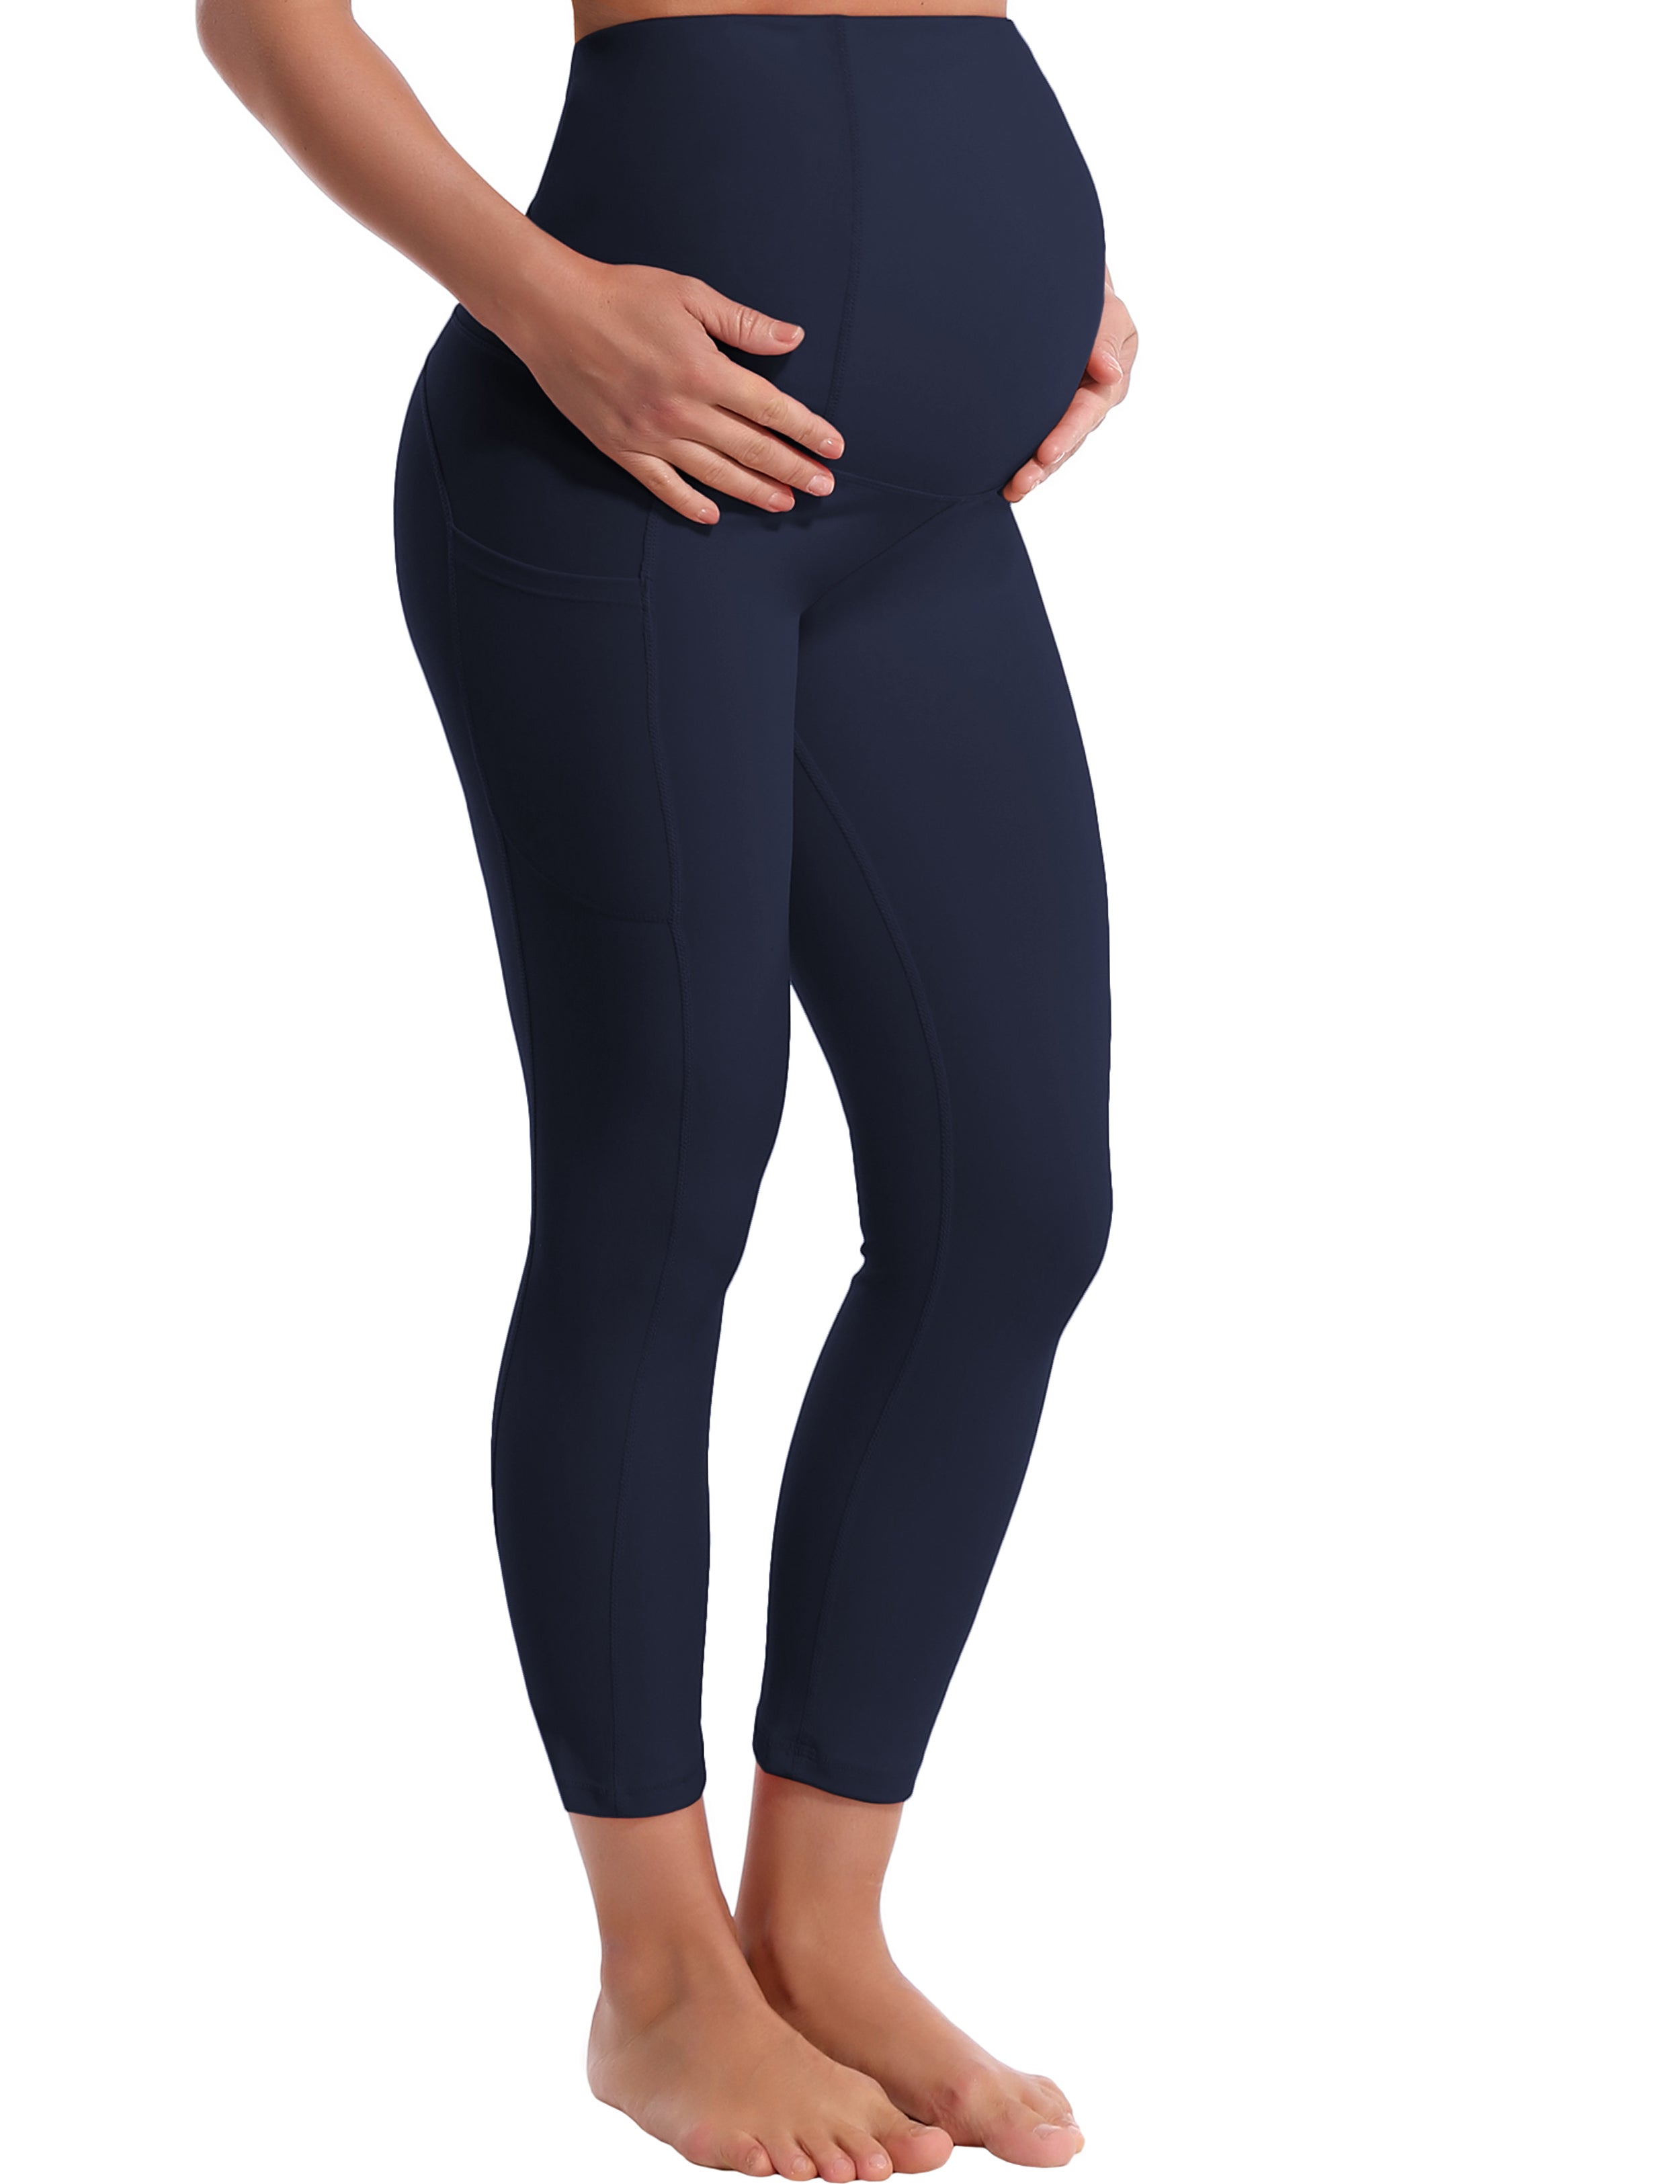 22" Side Pockets Maternity Biking Pants darknavy 87%Nylon/13%Spandex Softest-ever fabric High elasticity 4-way stretch Fabric doesn't attract lint easily No see-through Moisture-wicking Machine wash